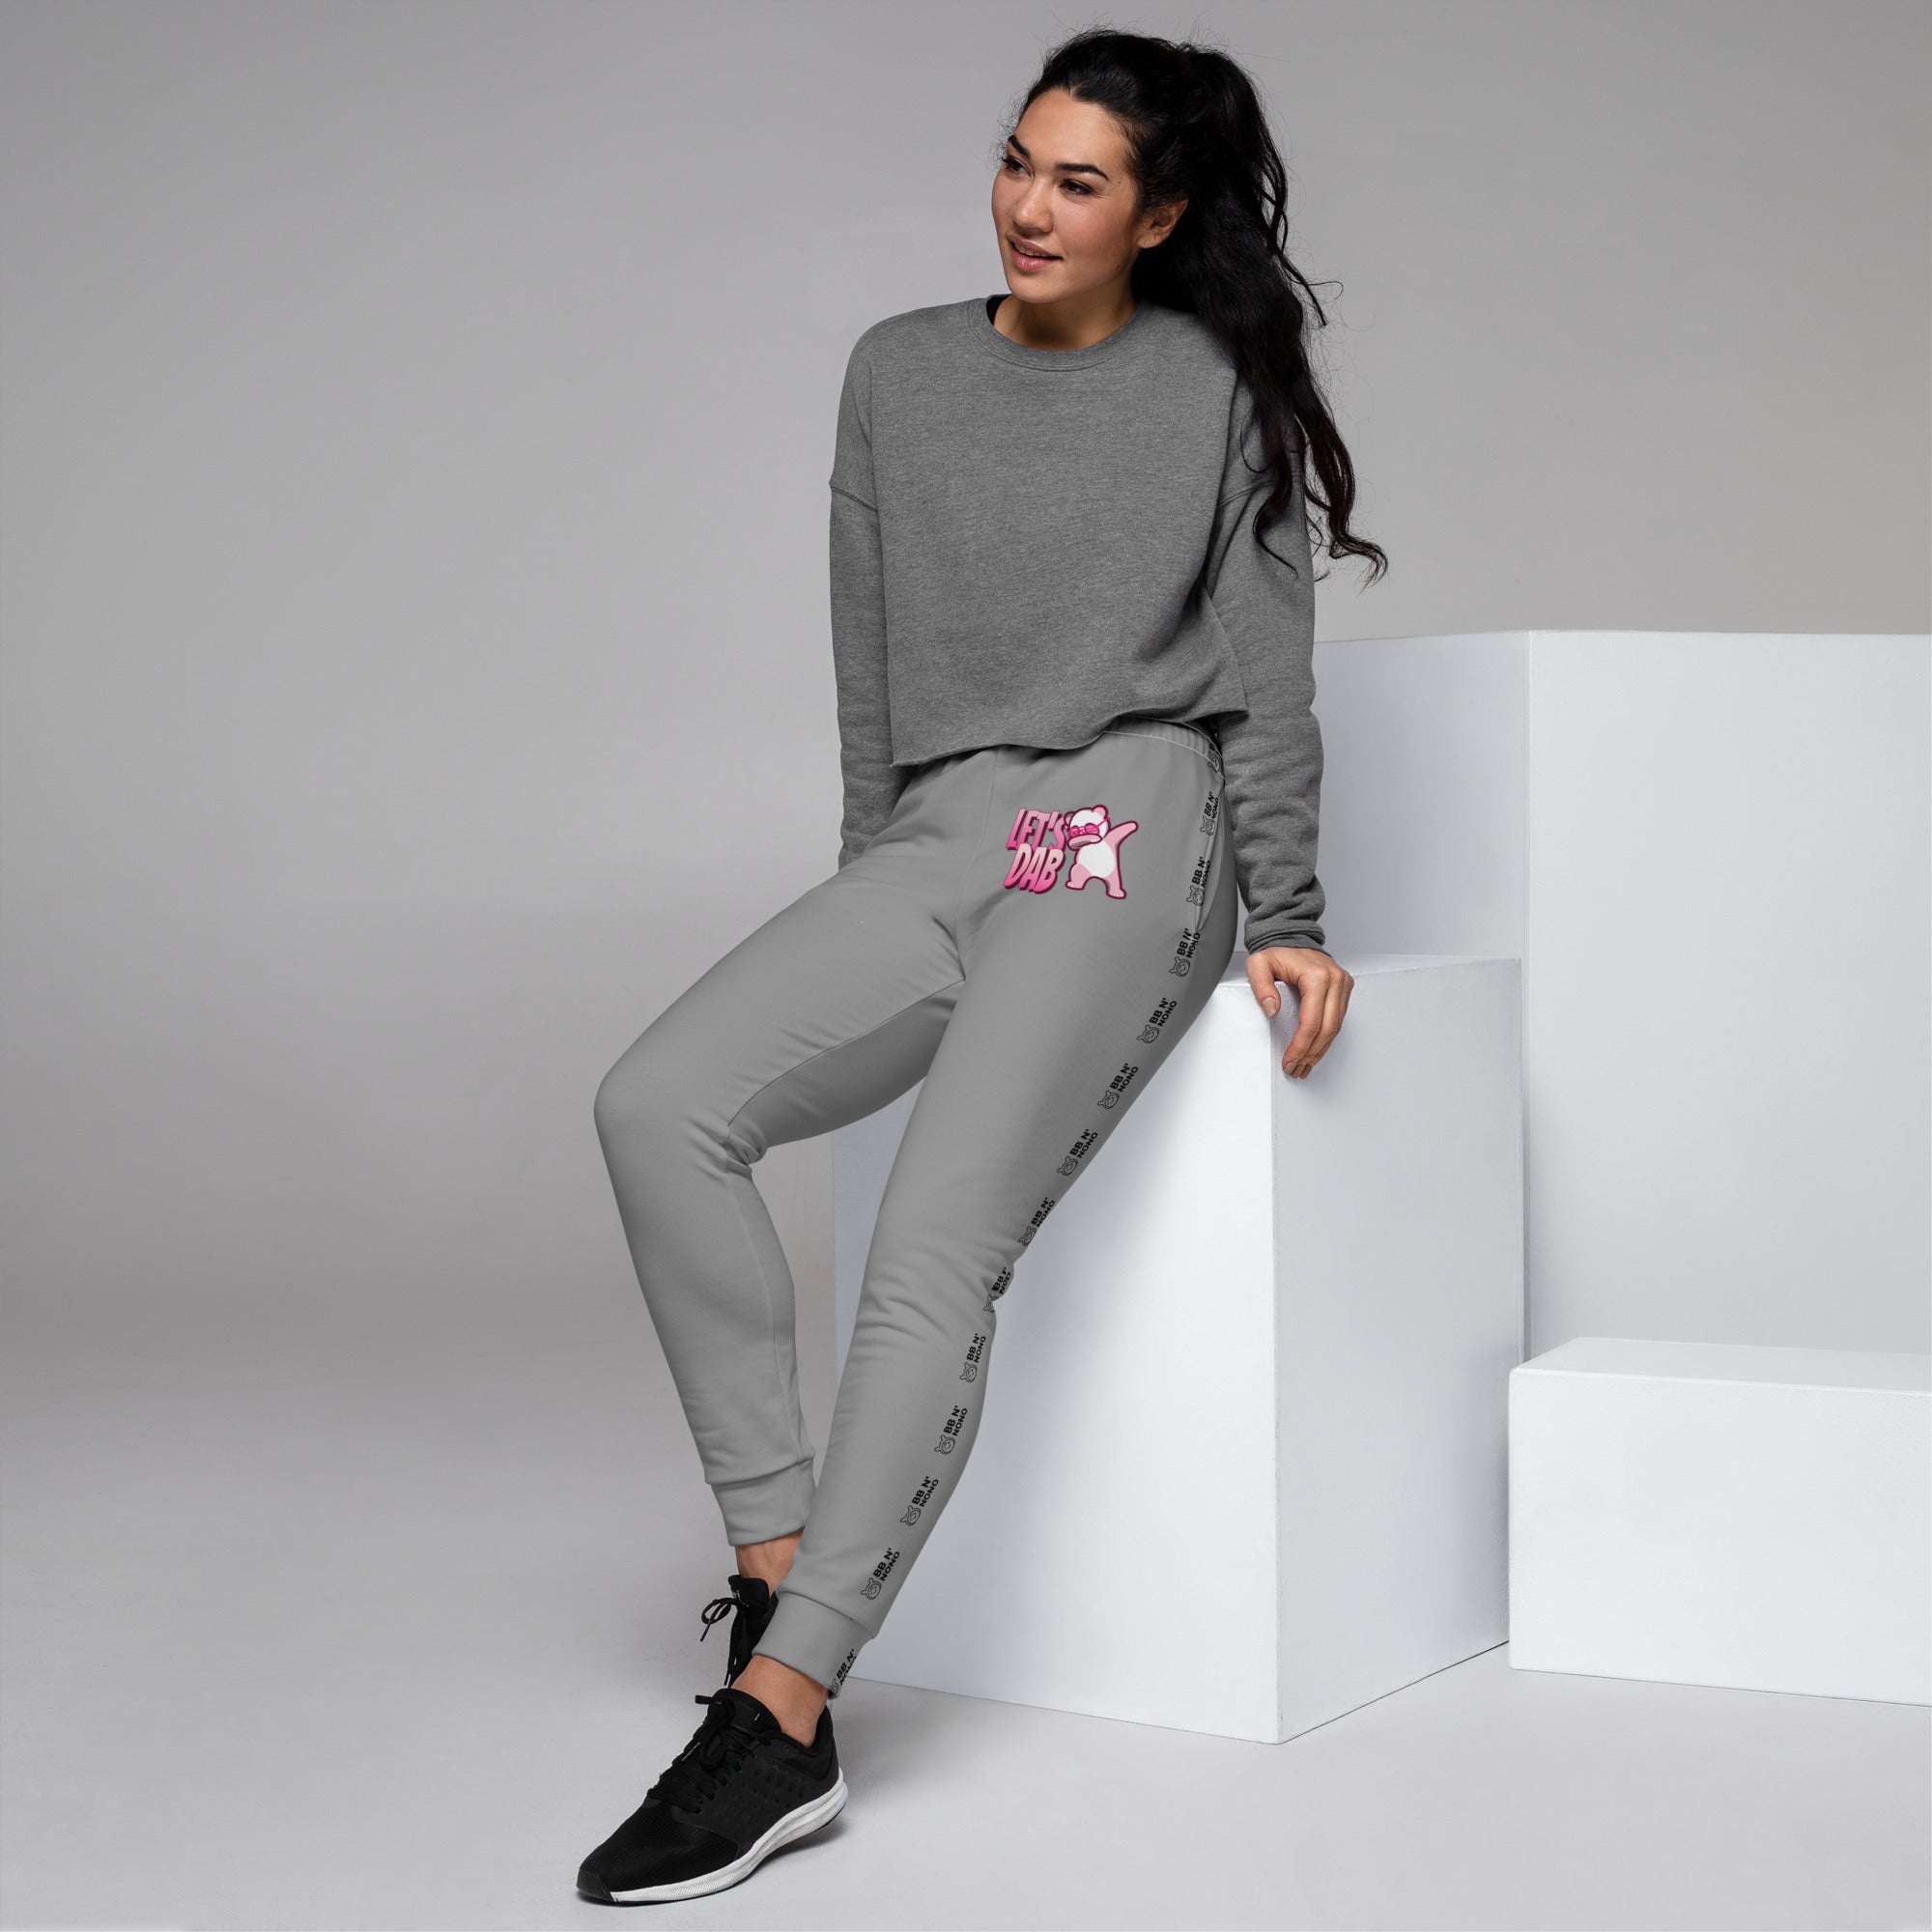 Let's dab - Women's Joggers (grey)